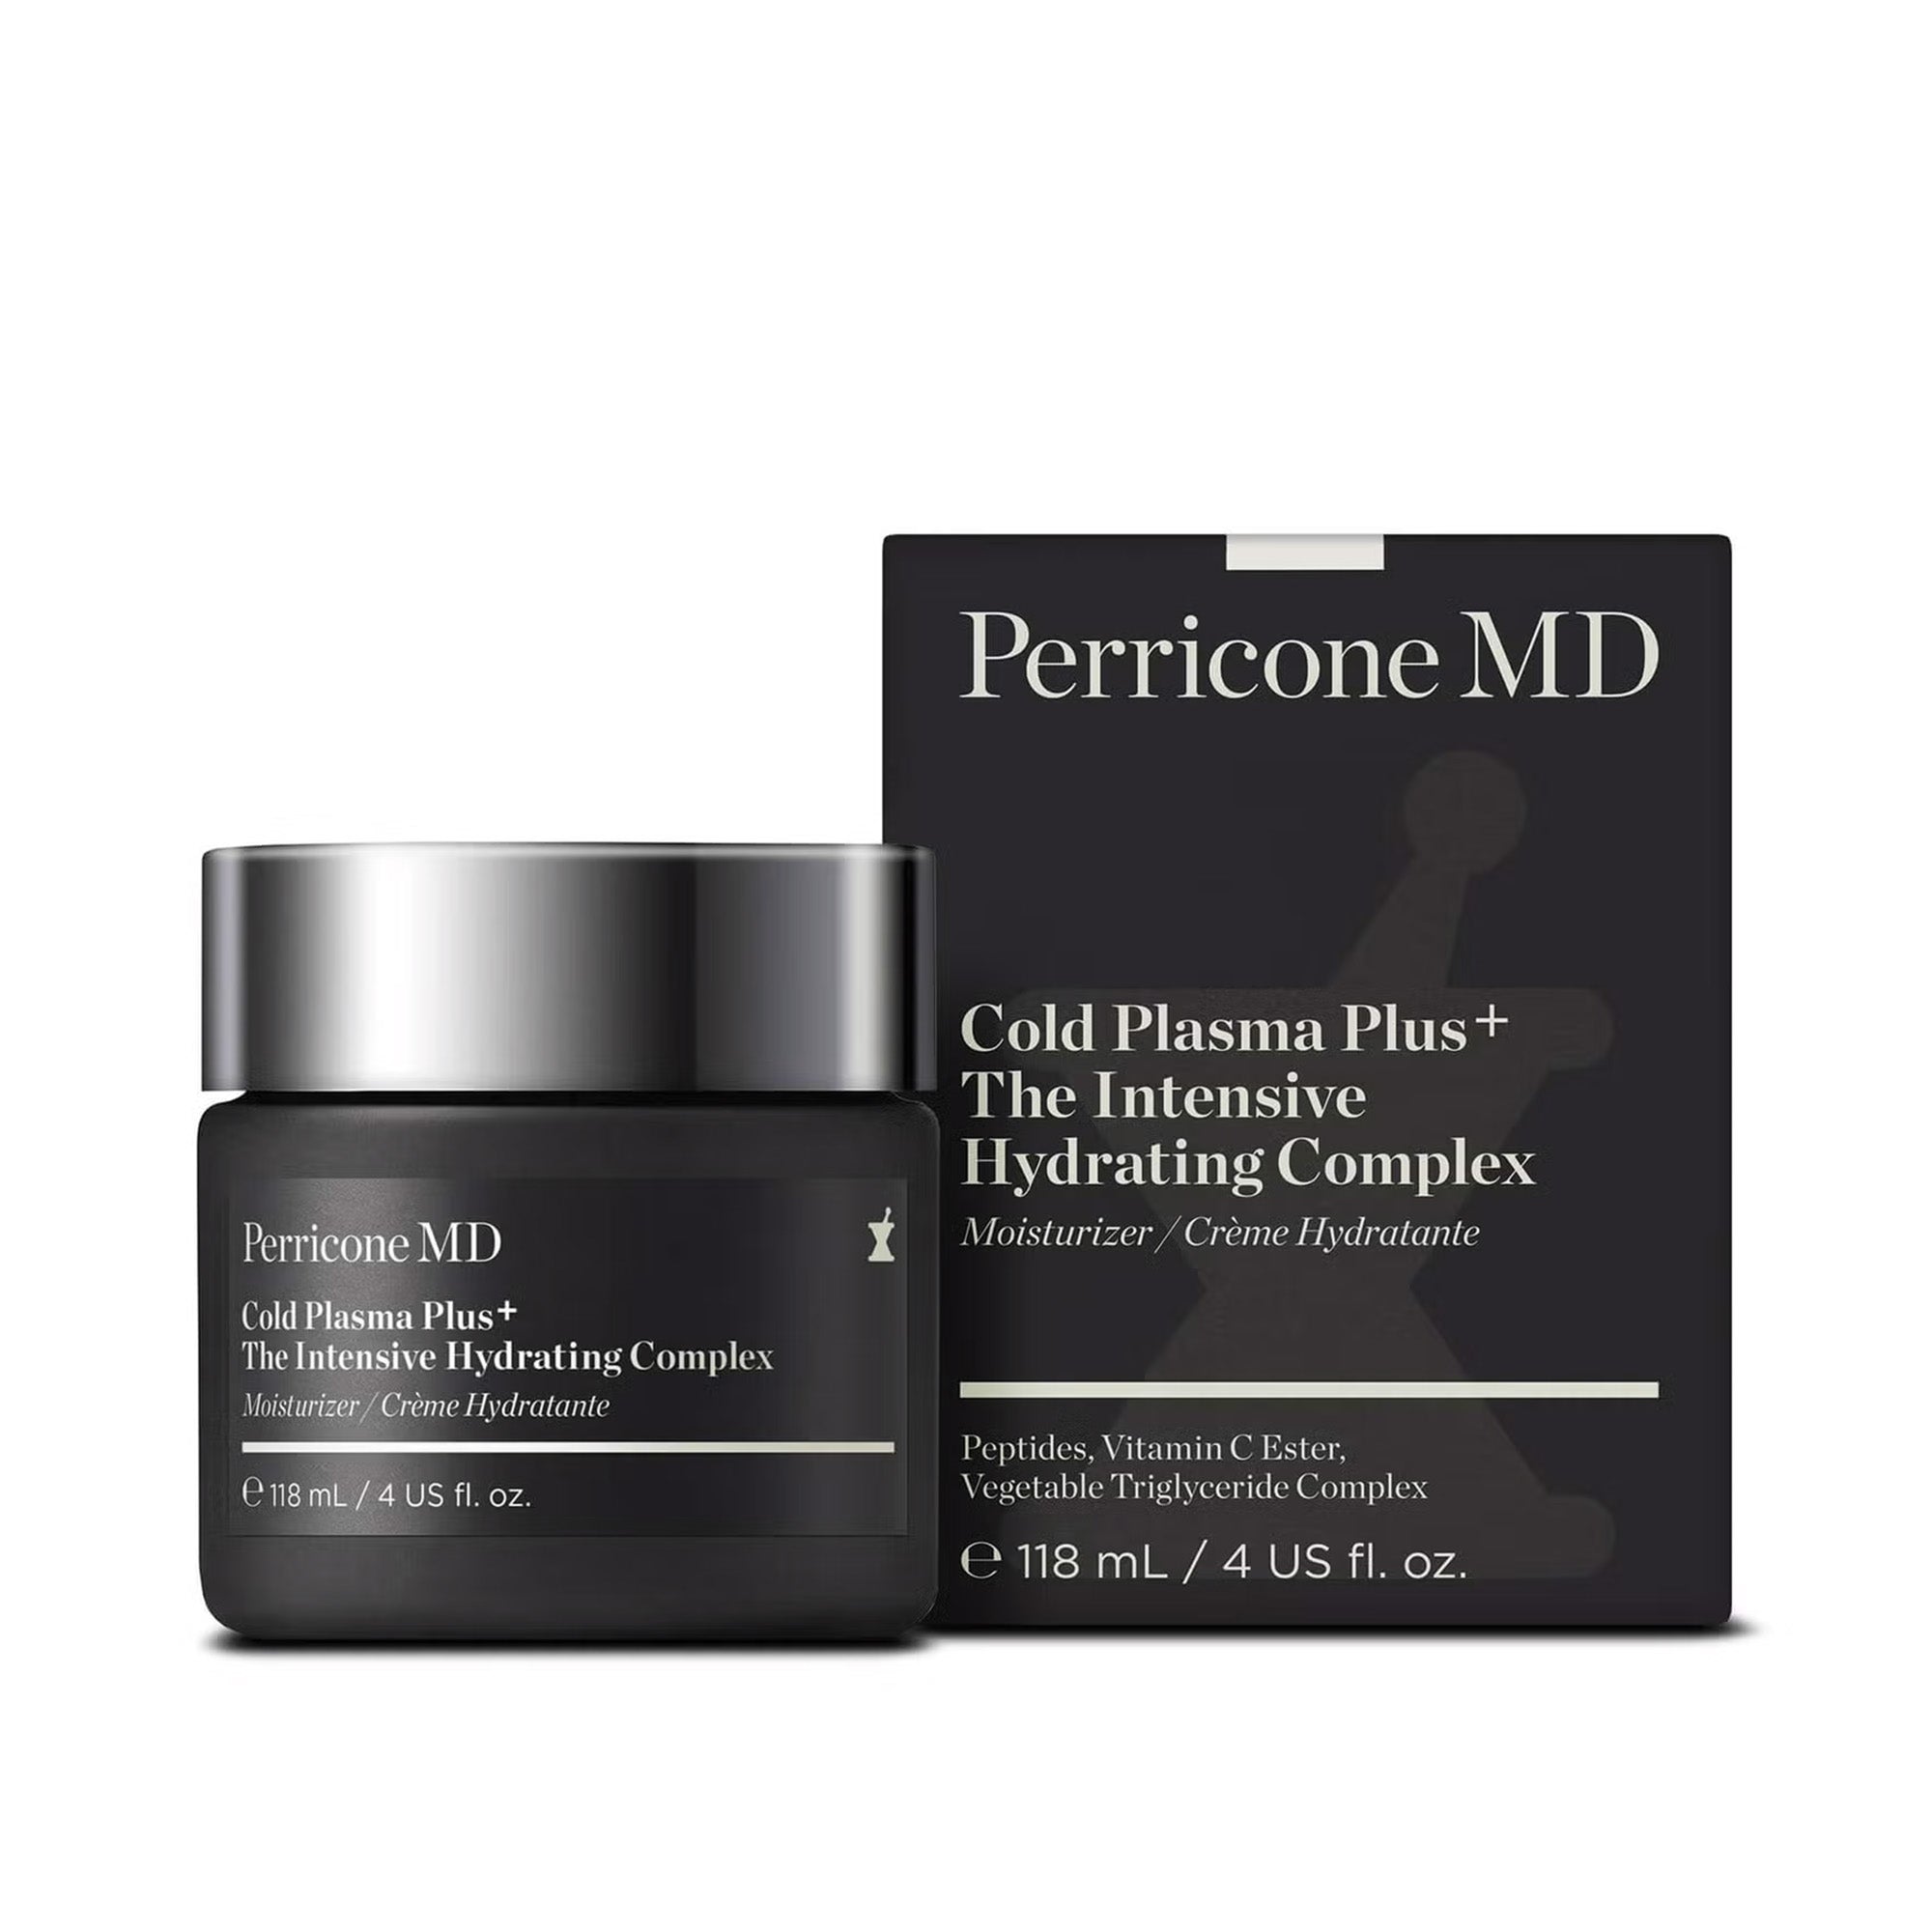 Perricone MD Cold Plasma Plus+ The Intensive Hydrating Complex / 4OZ